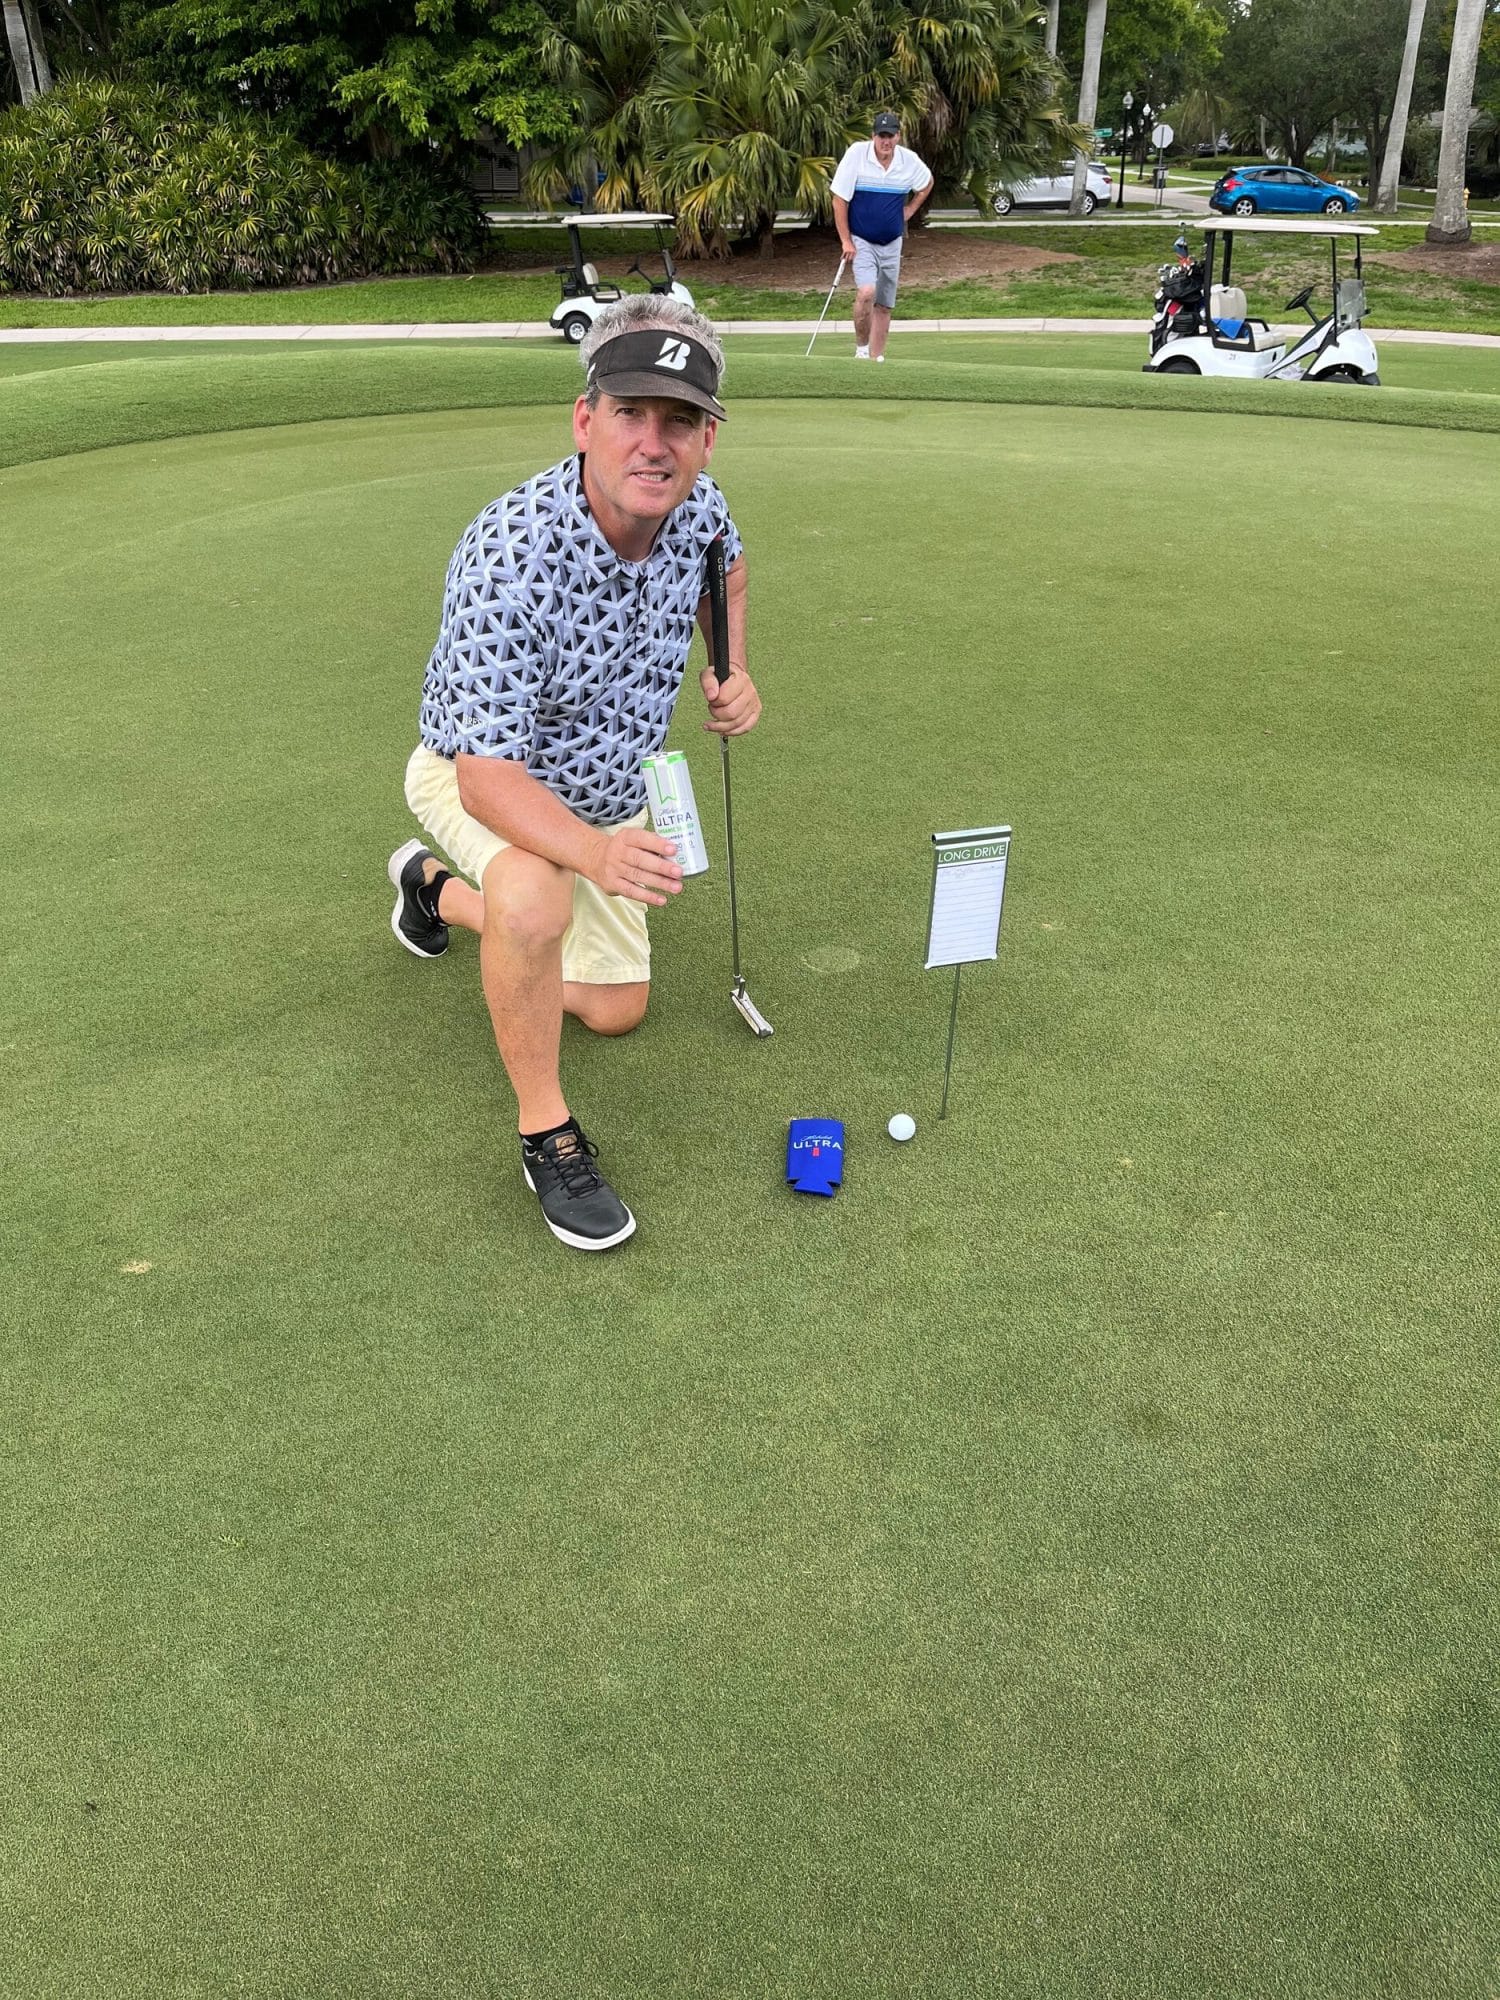 Closest to the pin pictures